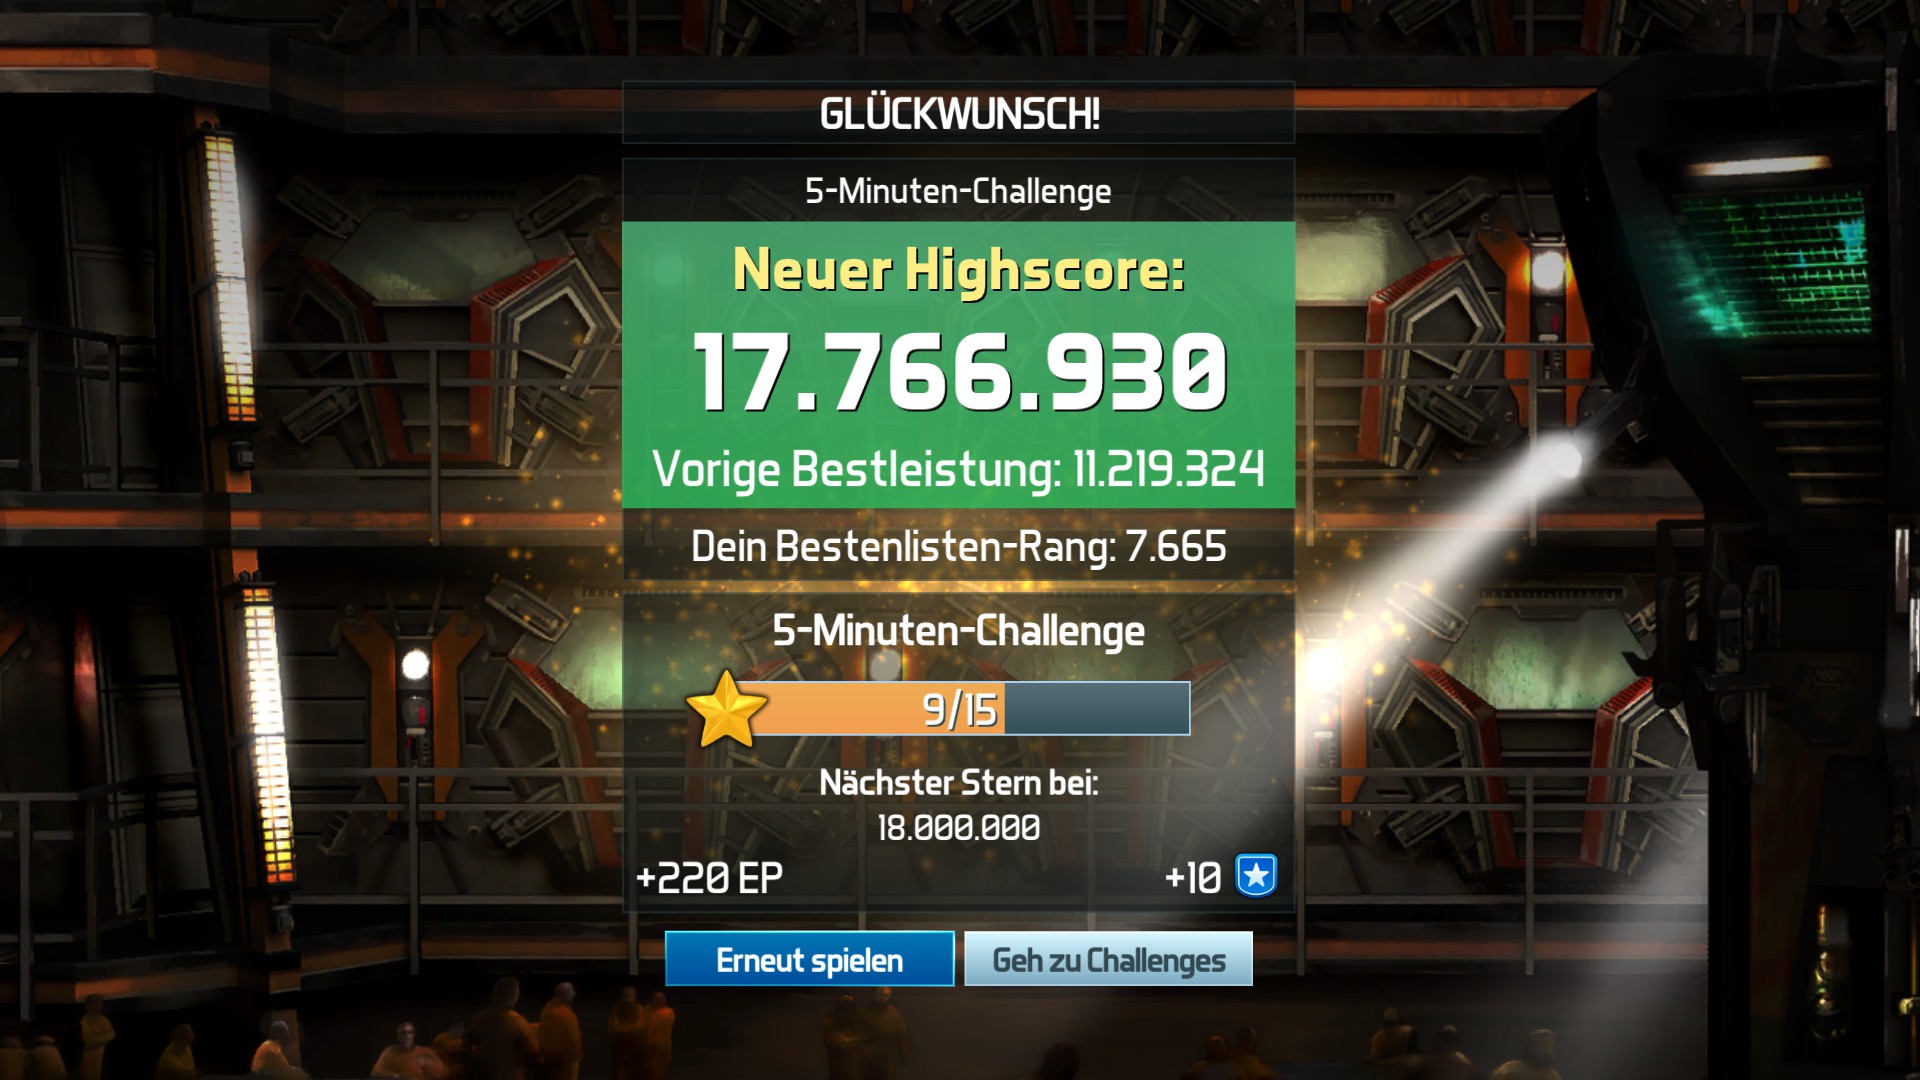 e2e4: Pinball FX3: Marvel’s Guardians Of The Galaxy [5 Minute] (PC) 17,766,930 points on 2022-06-13 12:39:42